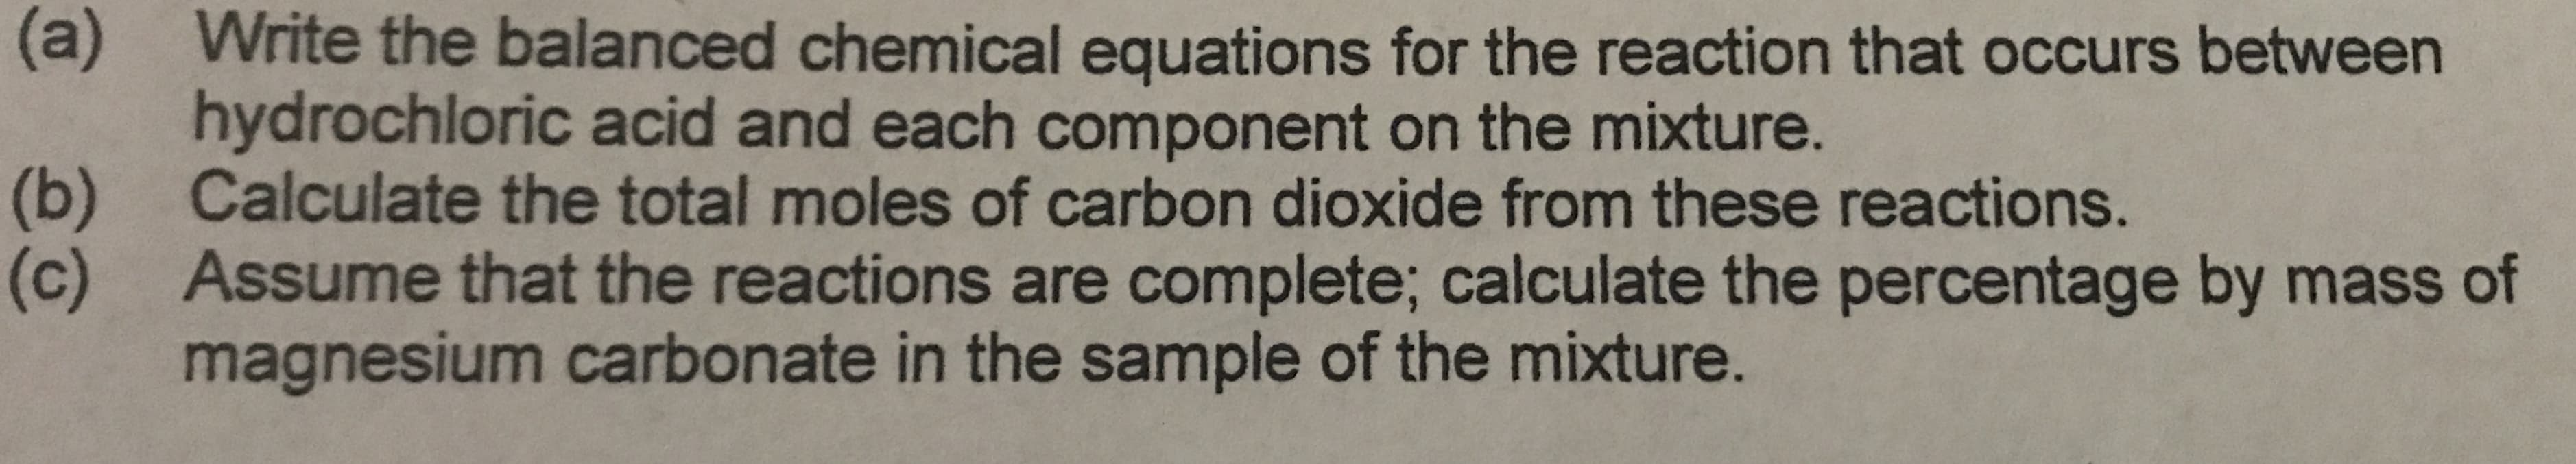 (a)
Write the balanced chemical equations for the reaction that occurs between
hydrochloric acid and each component on the mixture.
|(b)
Calculate the total moles of carbon dioxide from these reactions.
(c)
Assume that the reactions are complete; calculate the percentage by mass of
magnesium carbonate in the sample of the mixture.
